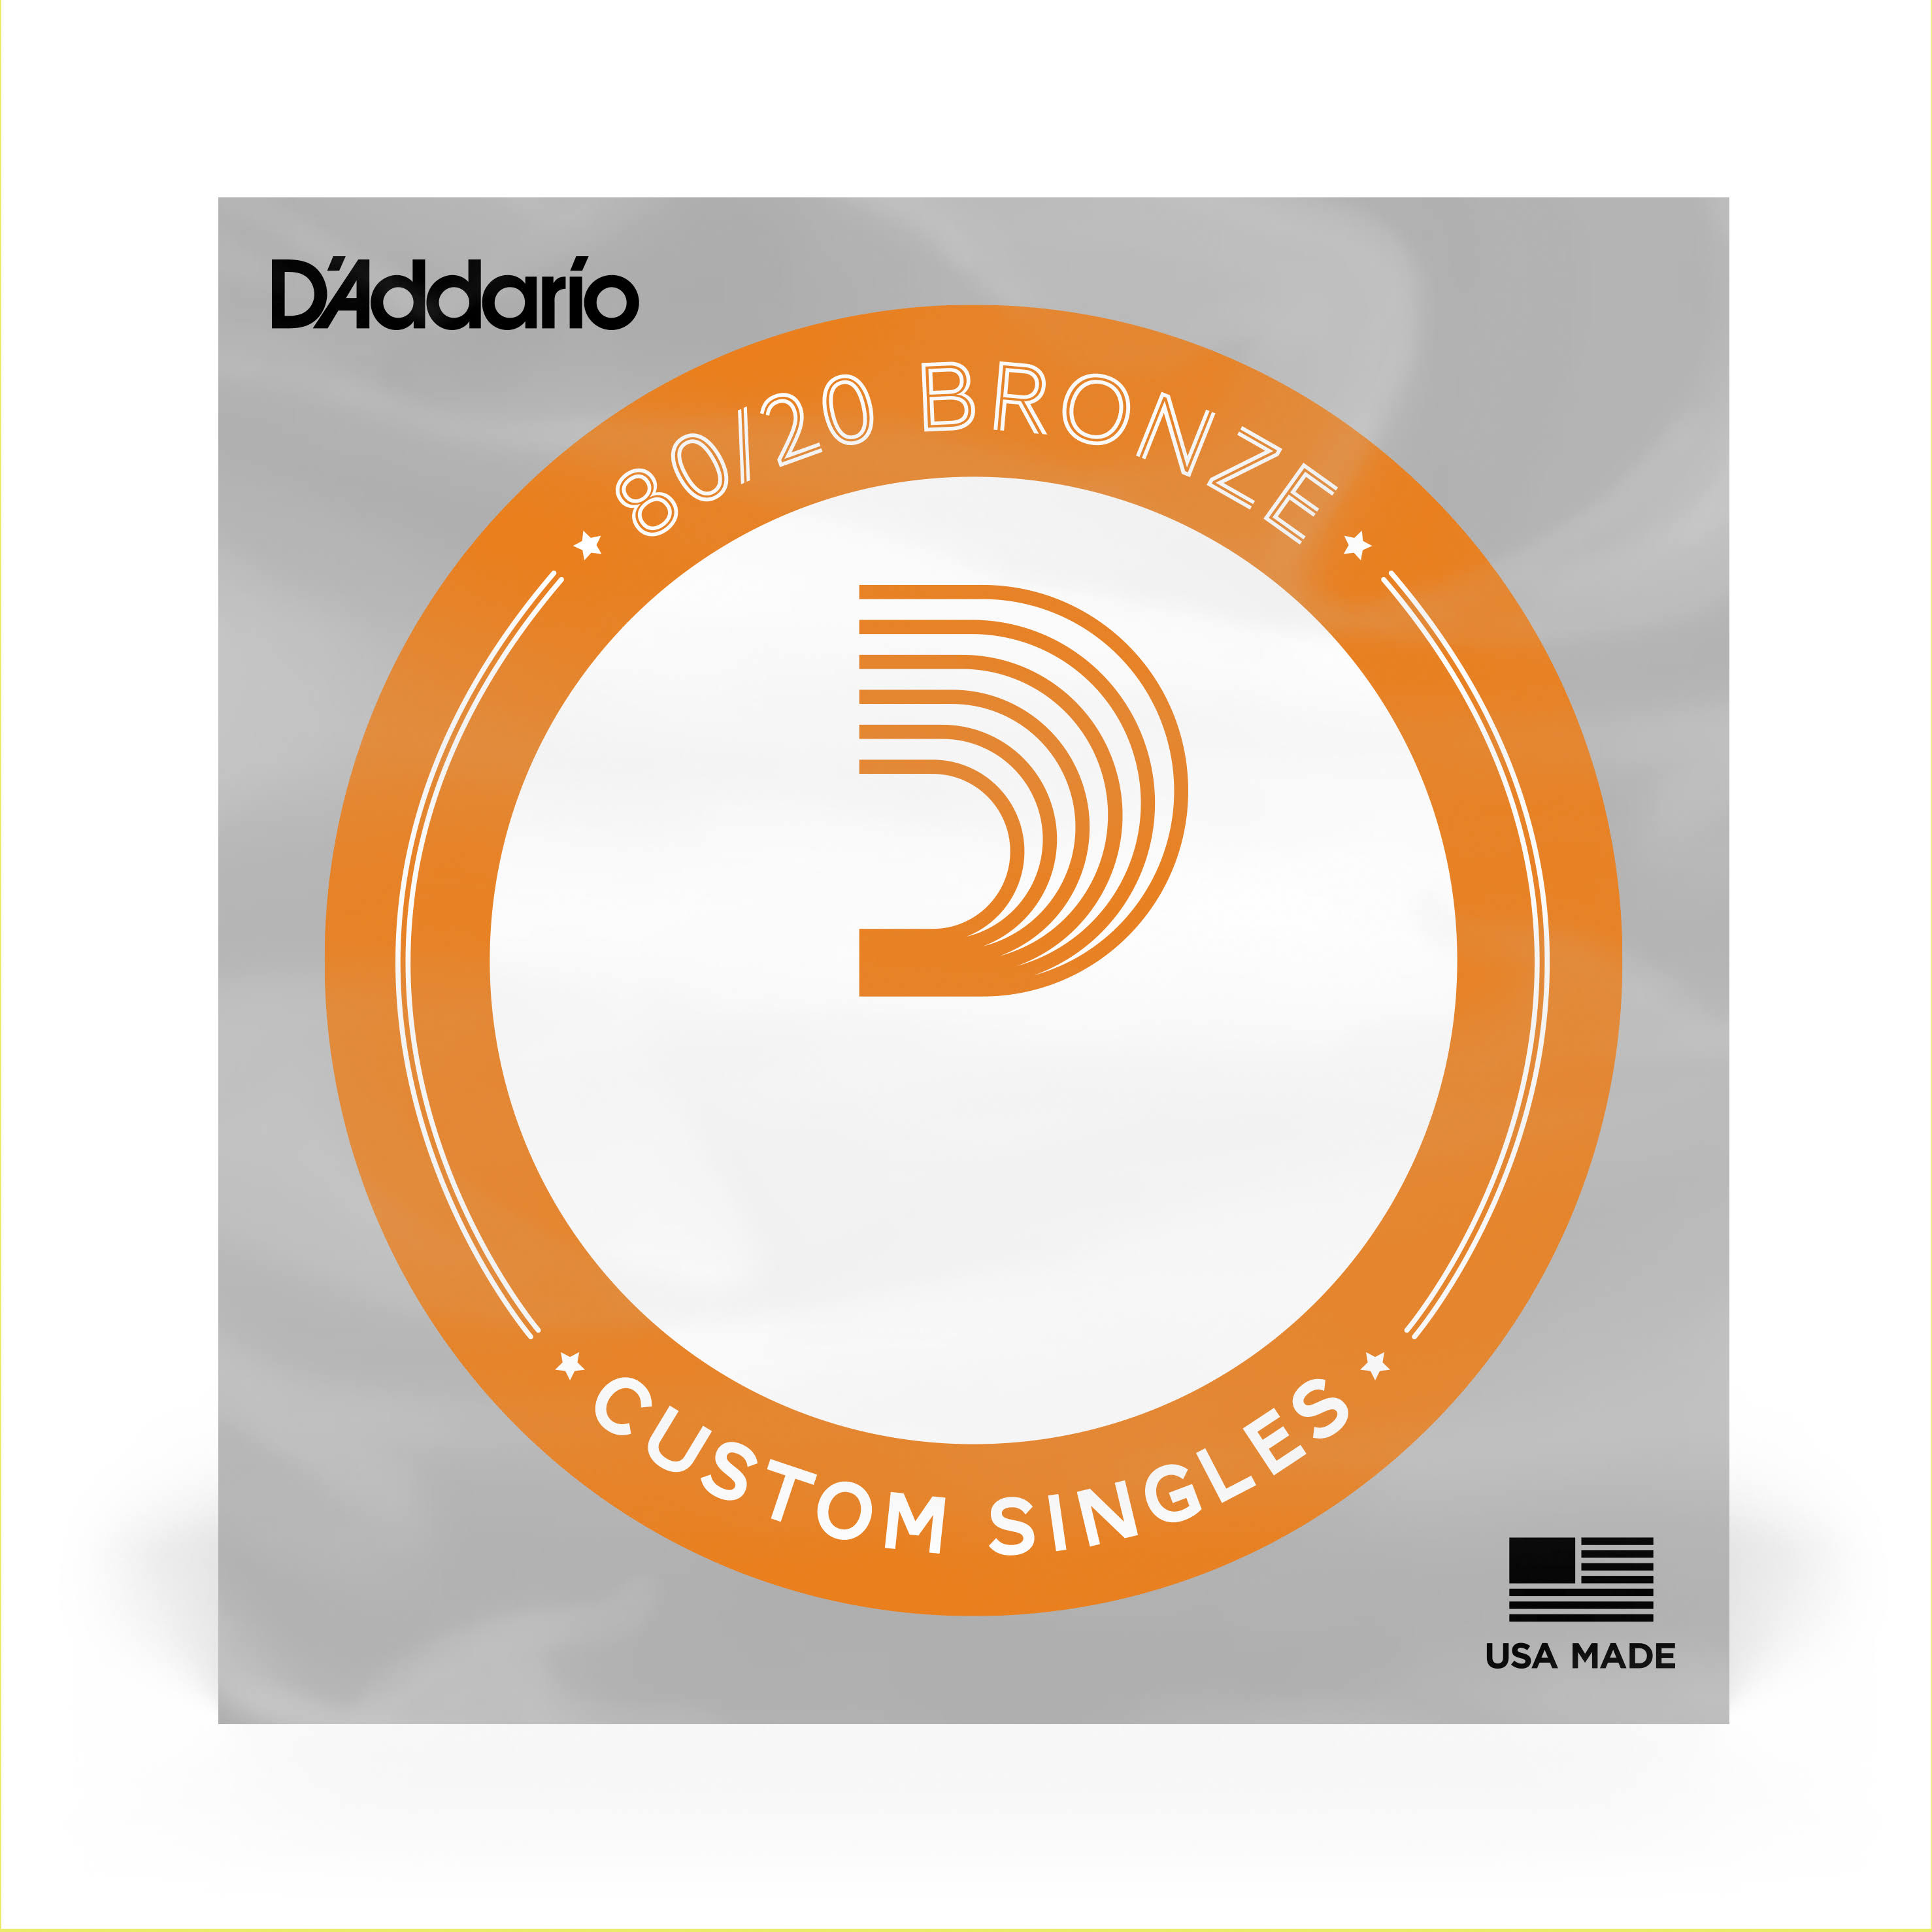 D'Addario BW032 Bronze Wound Single Acoustic Guitar String